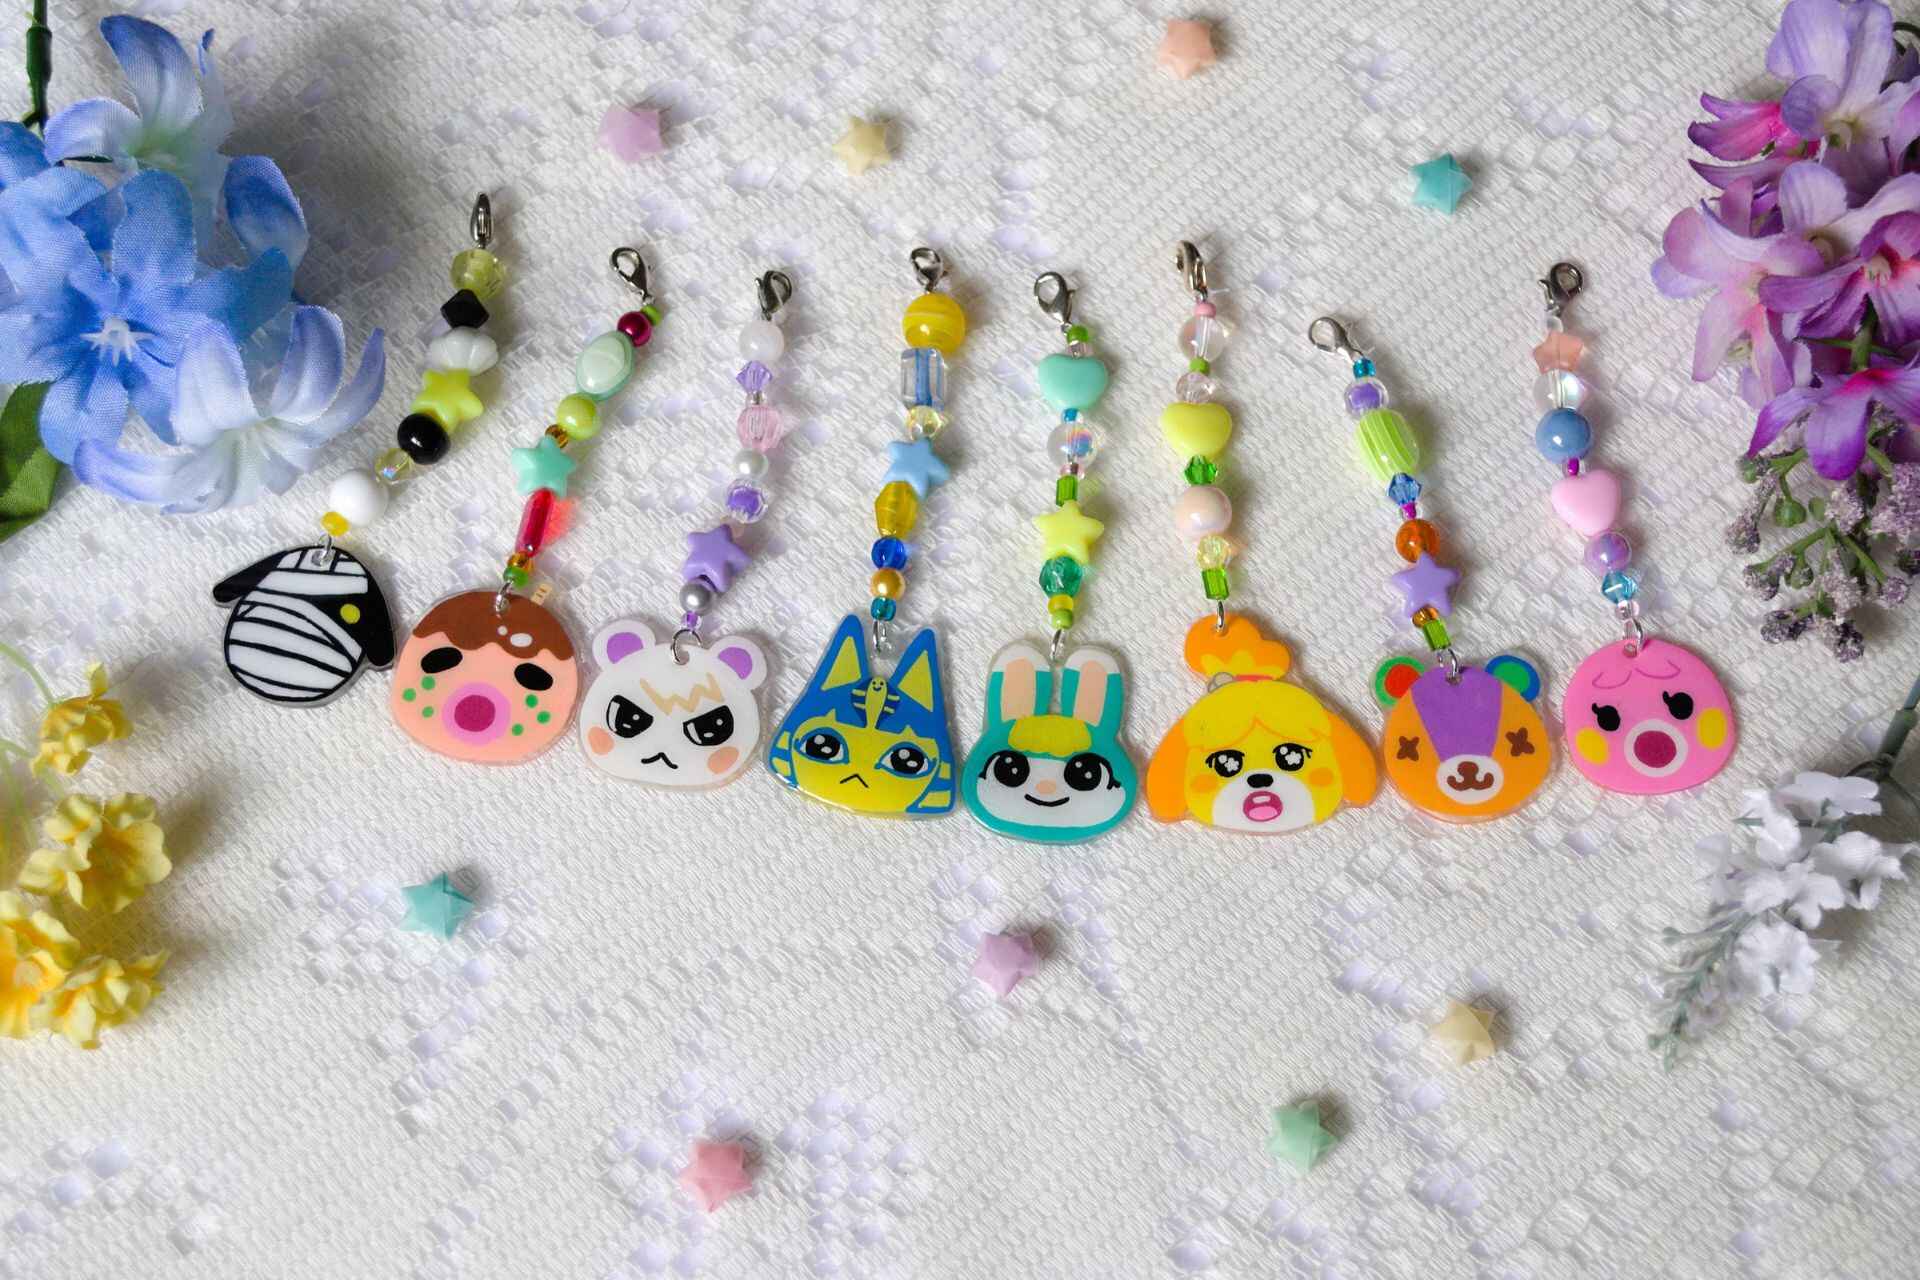 Crafting Shrinky Dinks Phone Charms: DIY Guide